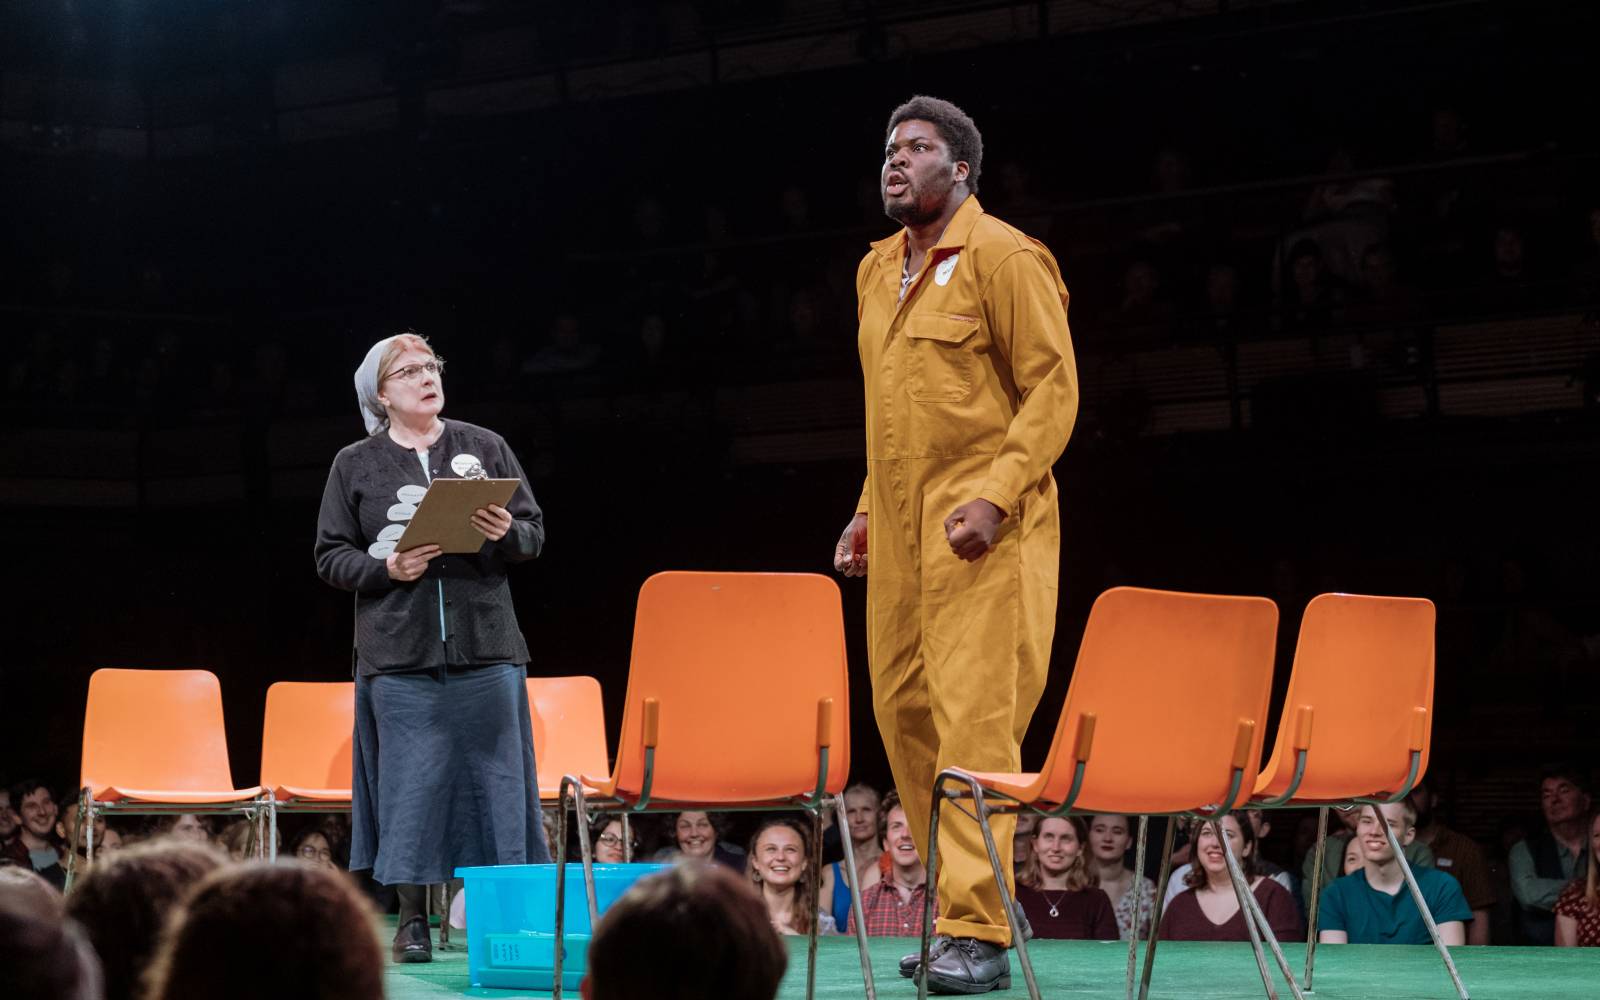 Hammed Animashaun (Bottom) performs, as Felicity Montagu (Quince) watches. They are surrounded by plastic chairs